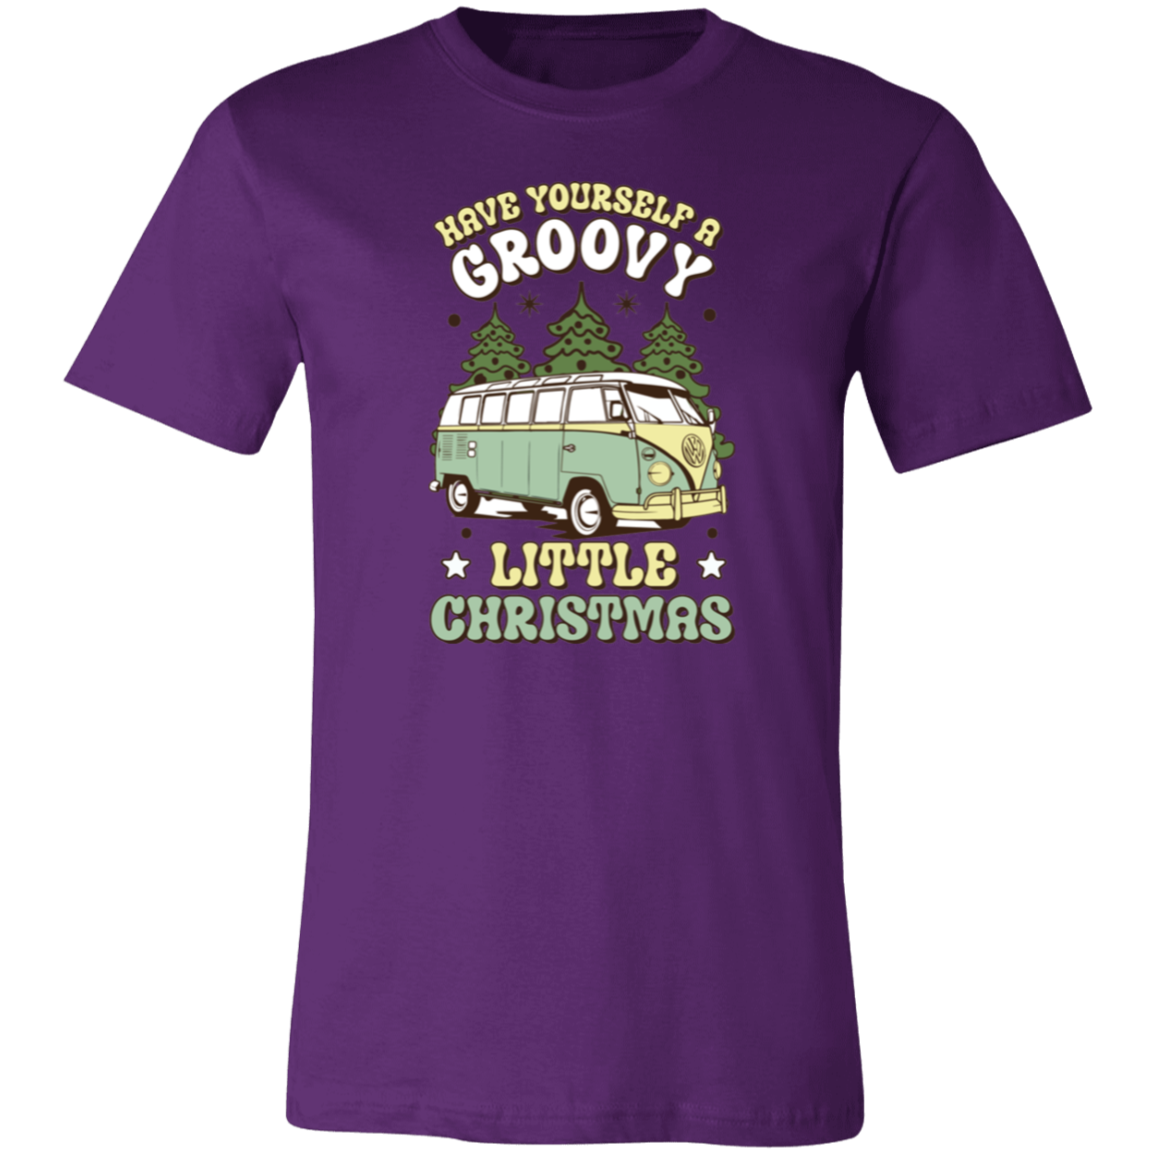 Have Yourself A groovy Little Christmas Shirt